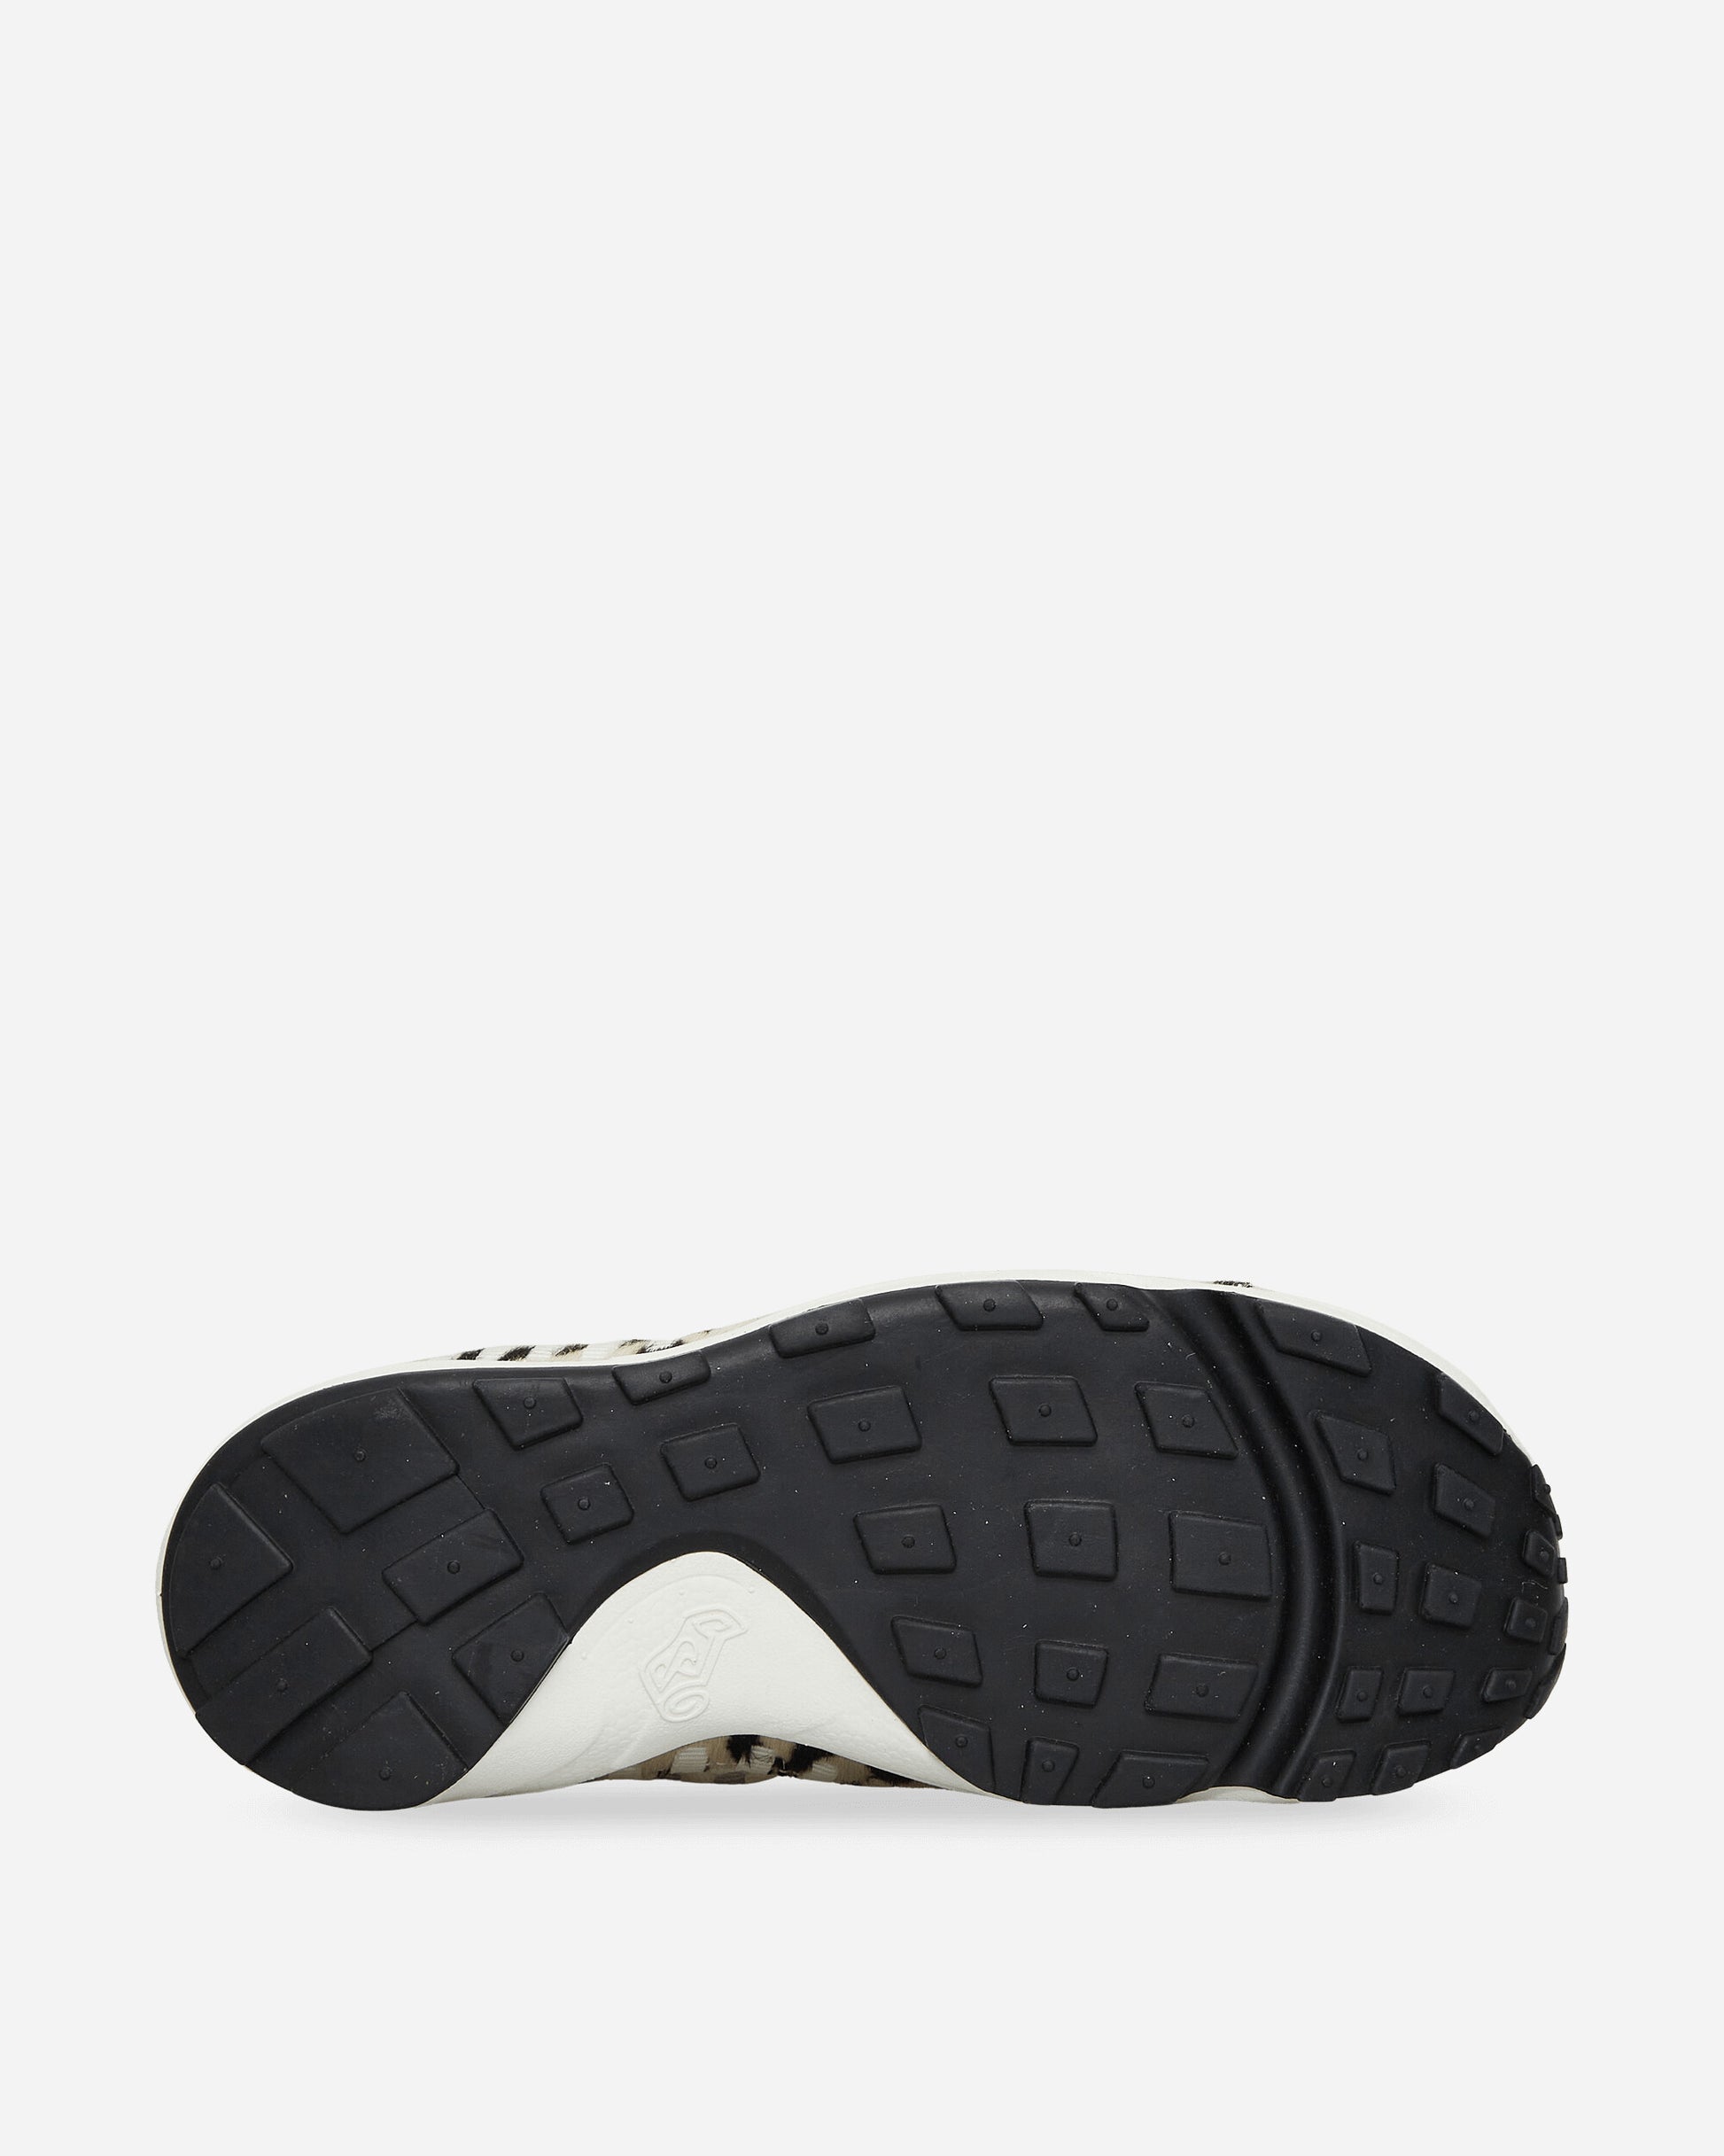 Nike Air Footscape Woven Sail/Black Sneakers Low FB1959-102